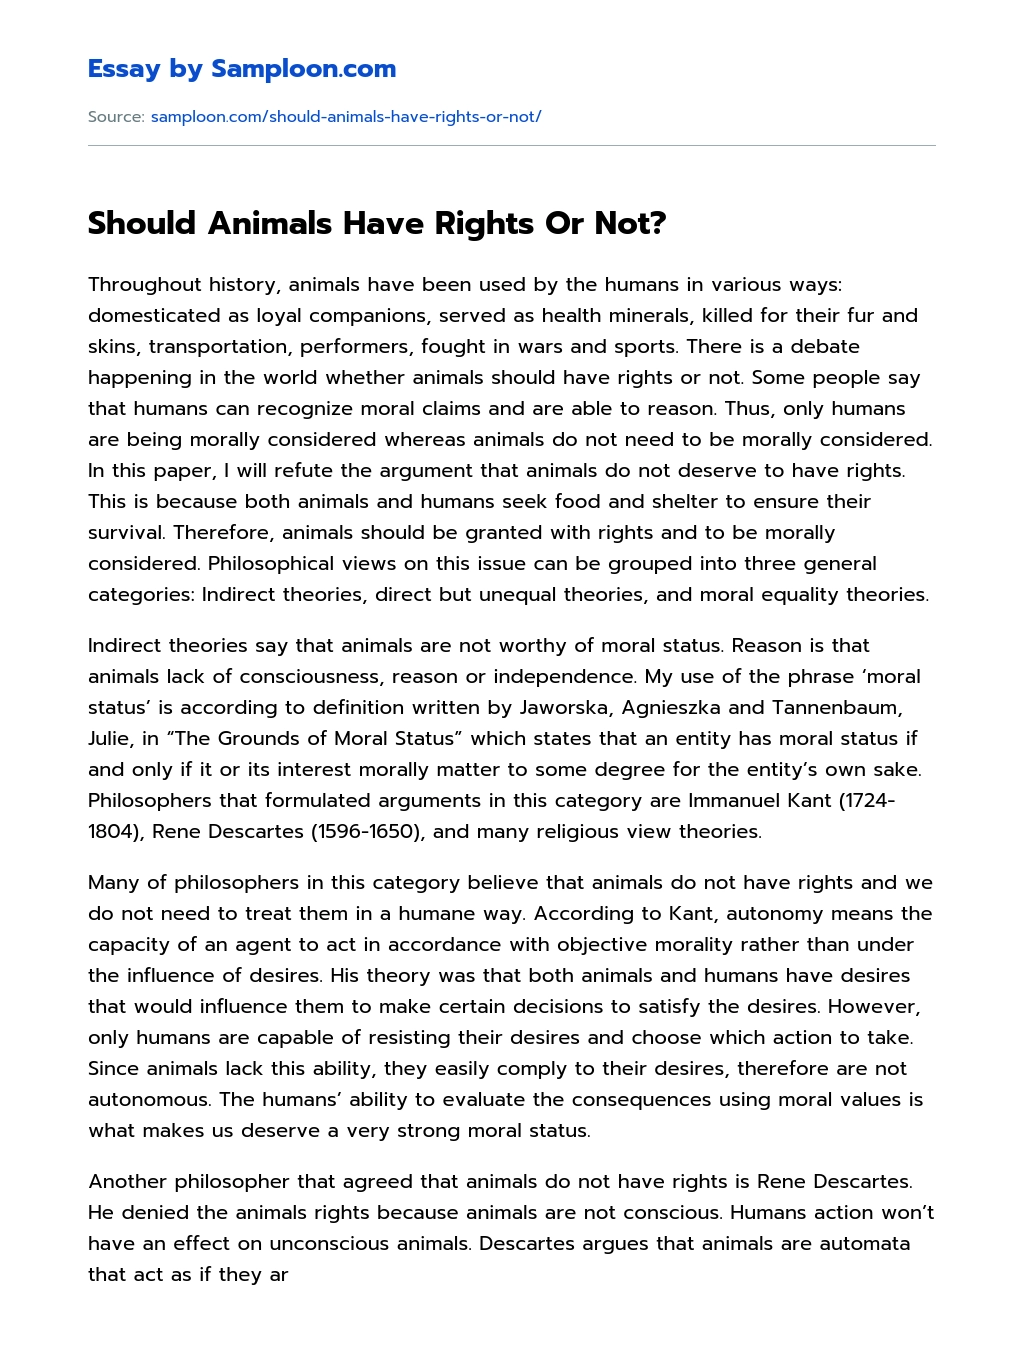 Should Animals Have Rights Or Not? essay